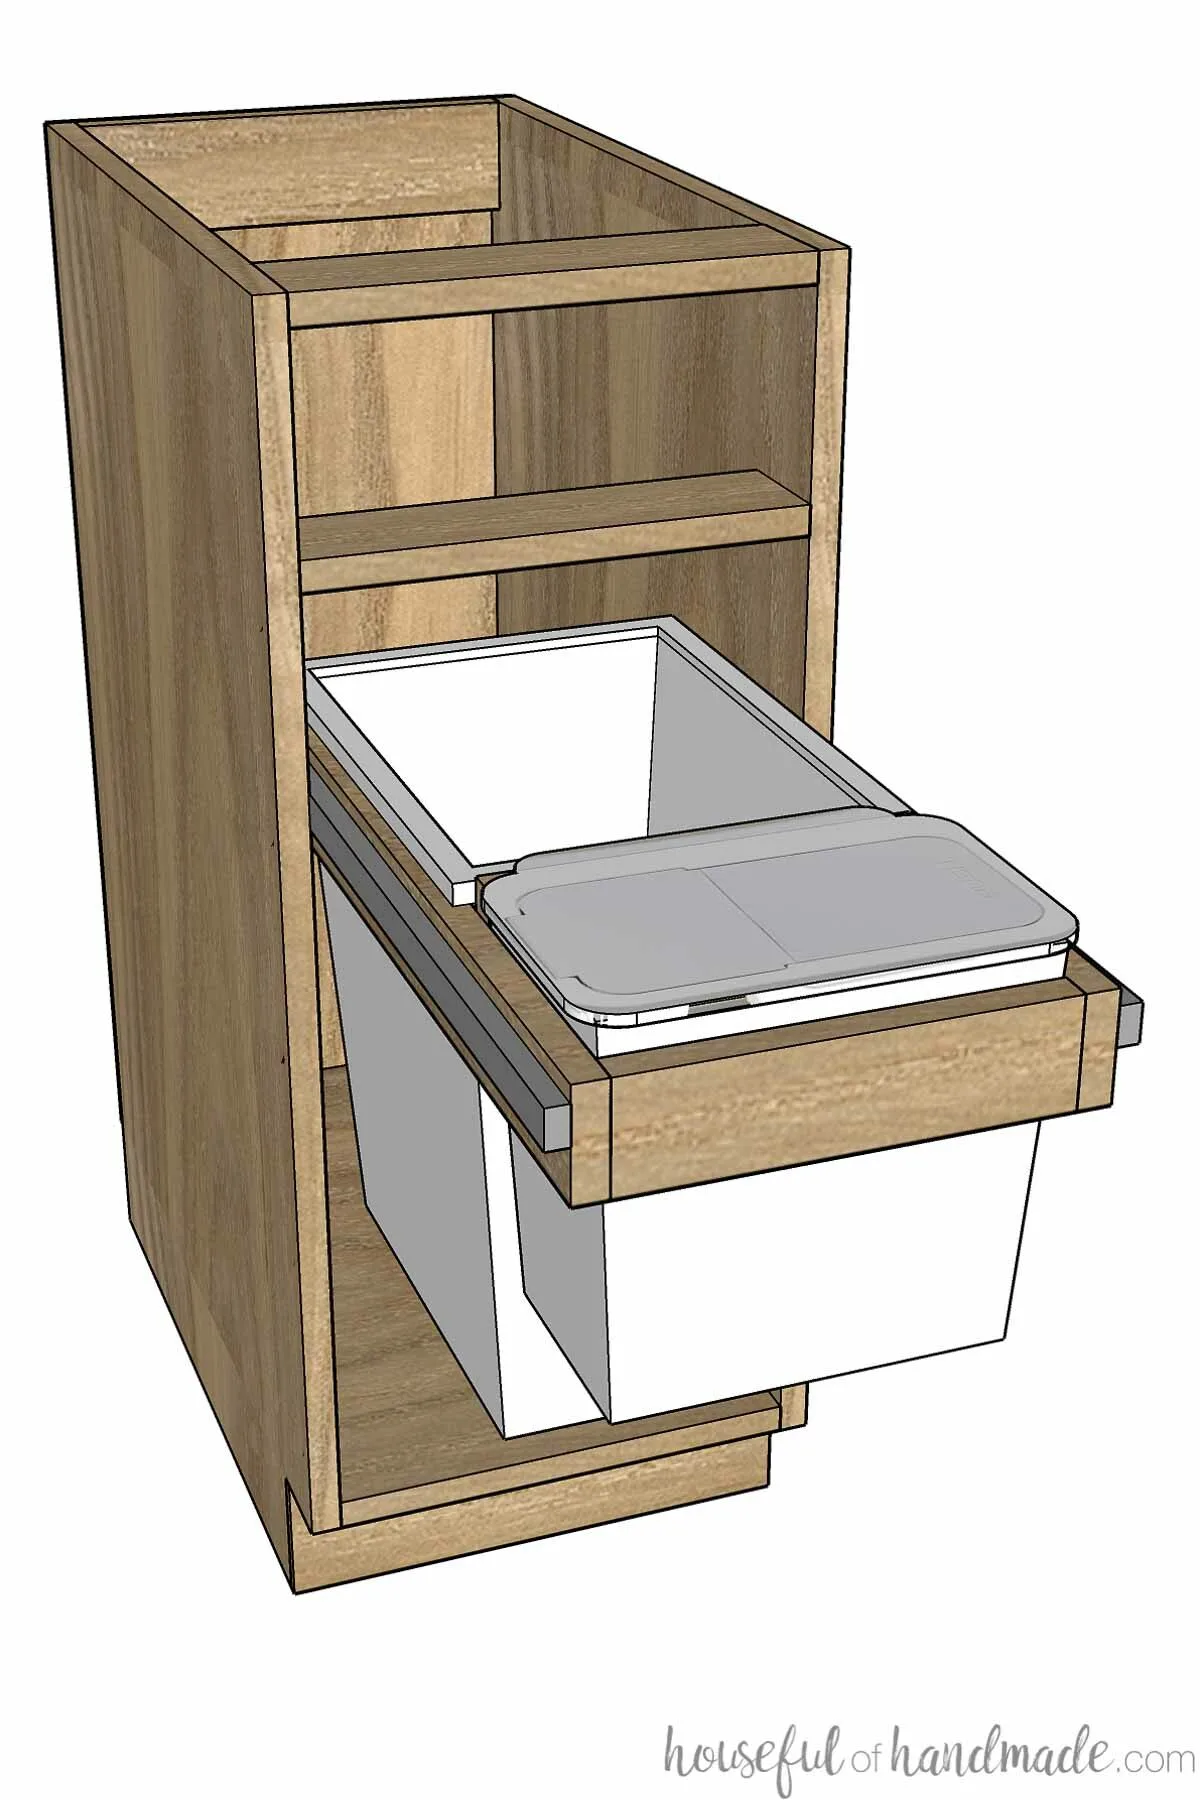 Drawing of build plans for a small trash can cabinet with a compost bin and drawer. 